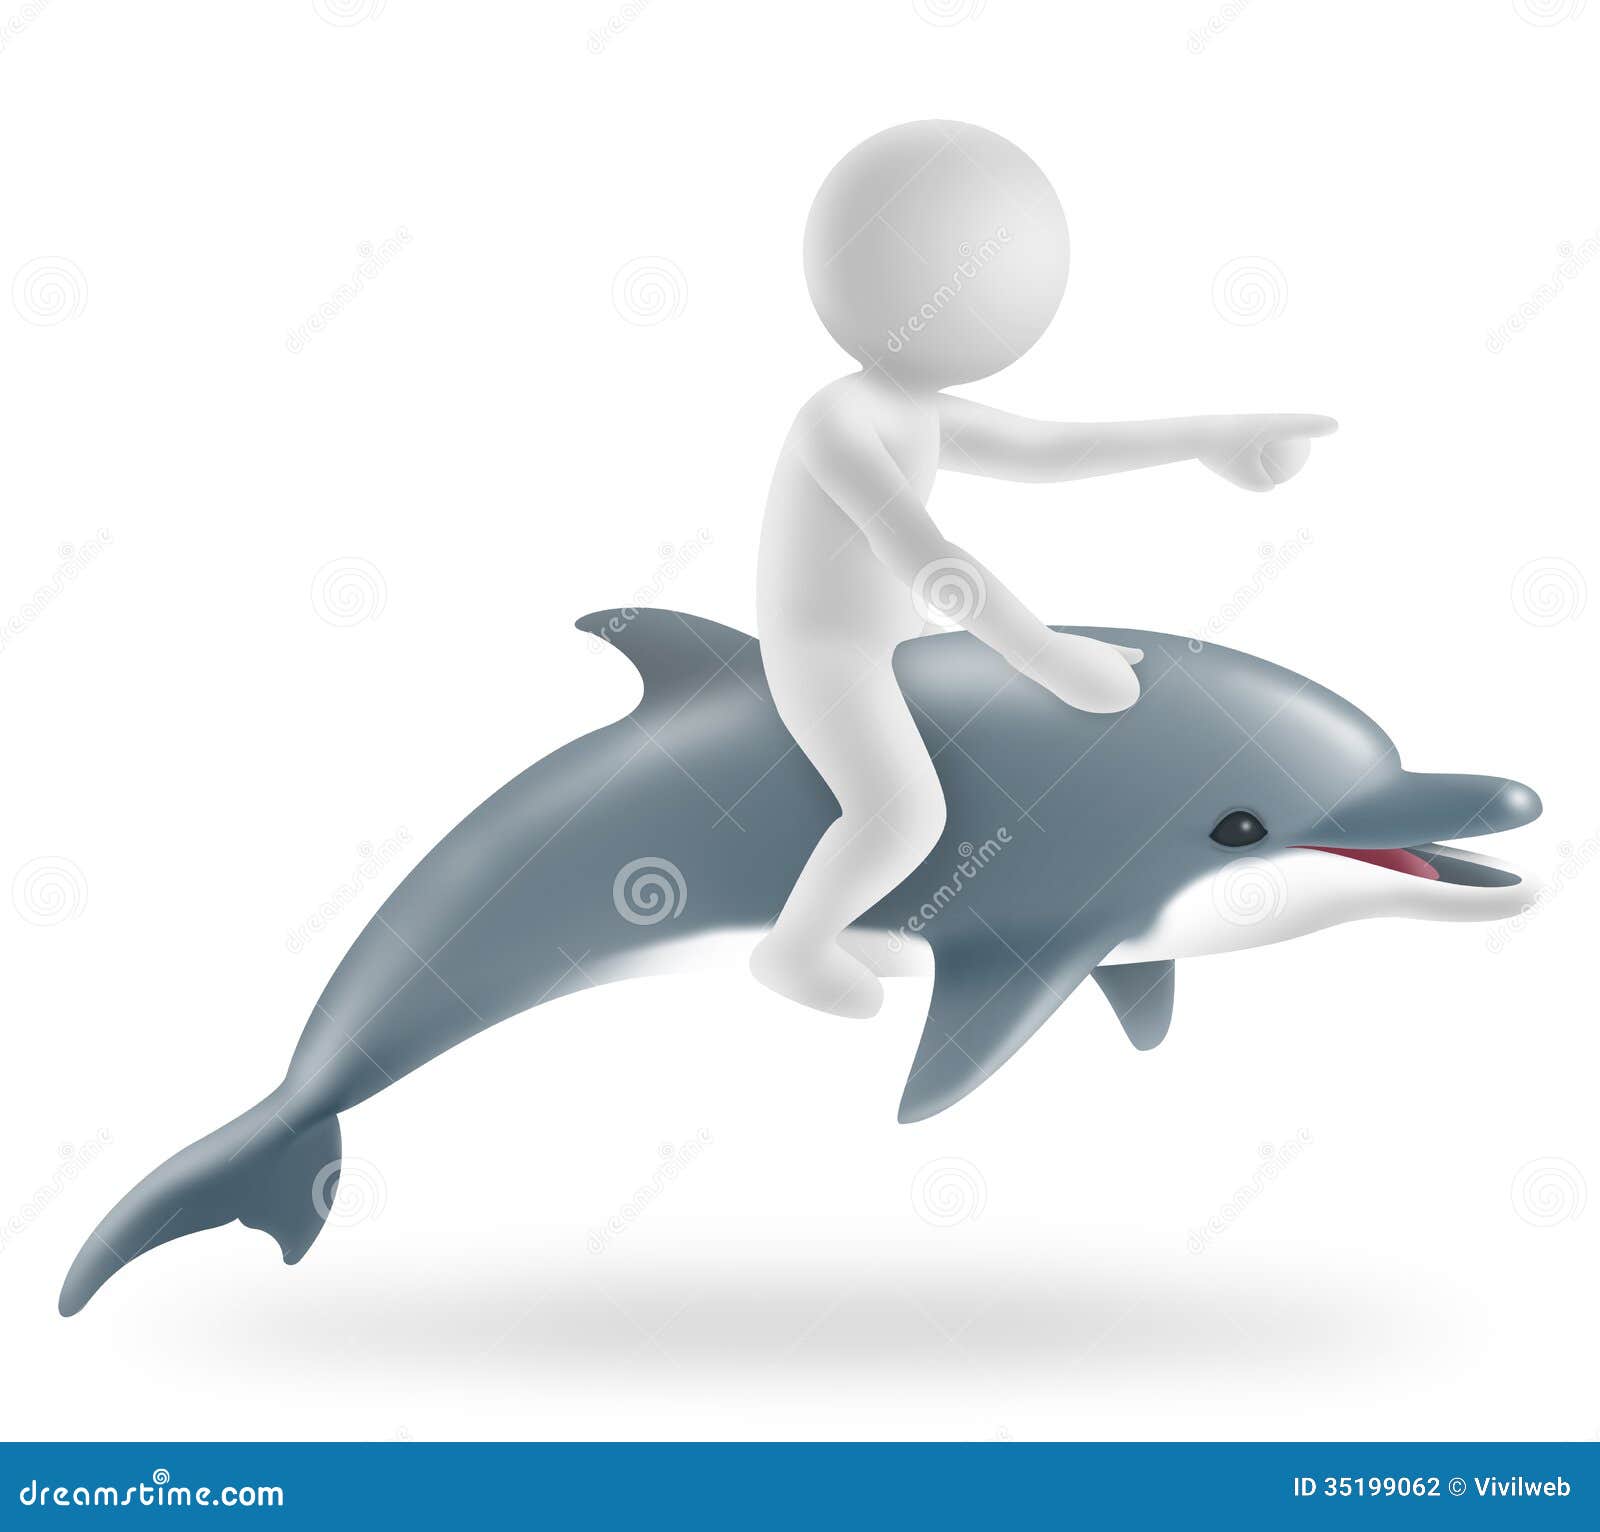 Boy astride a dolphin stock illustration. Image of dolphin - 35199062